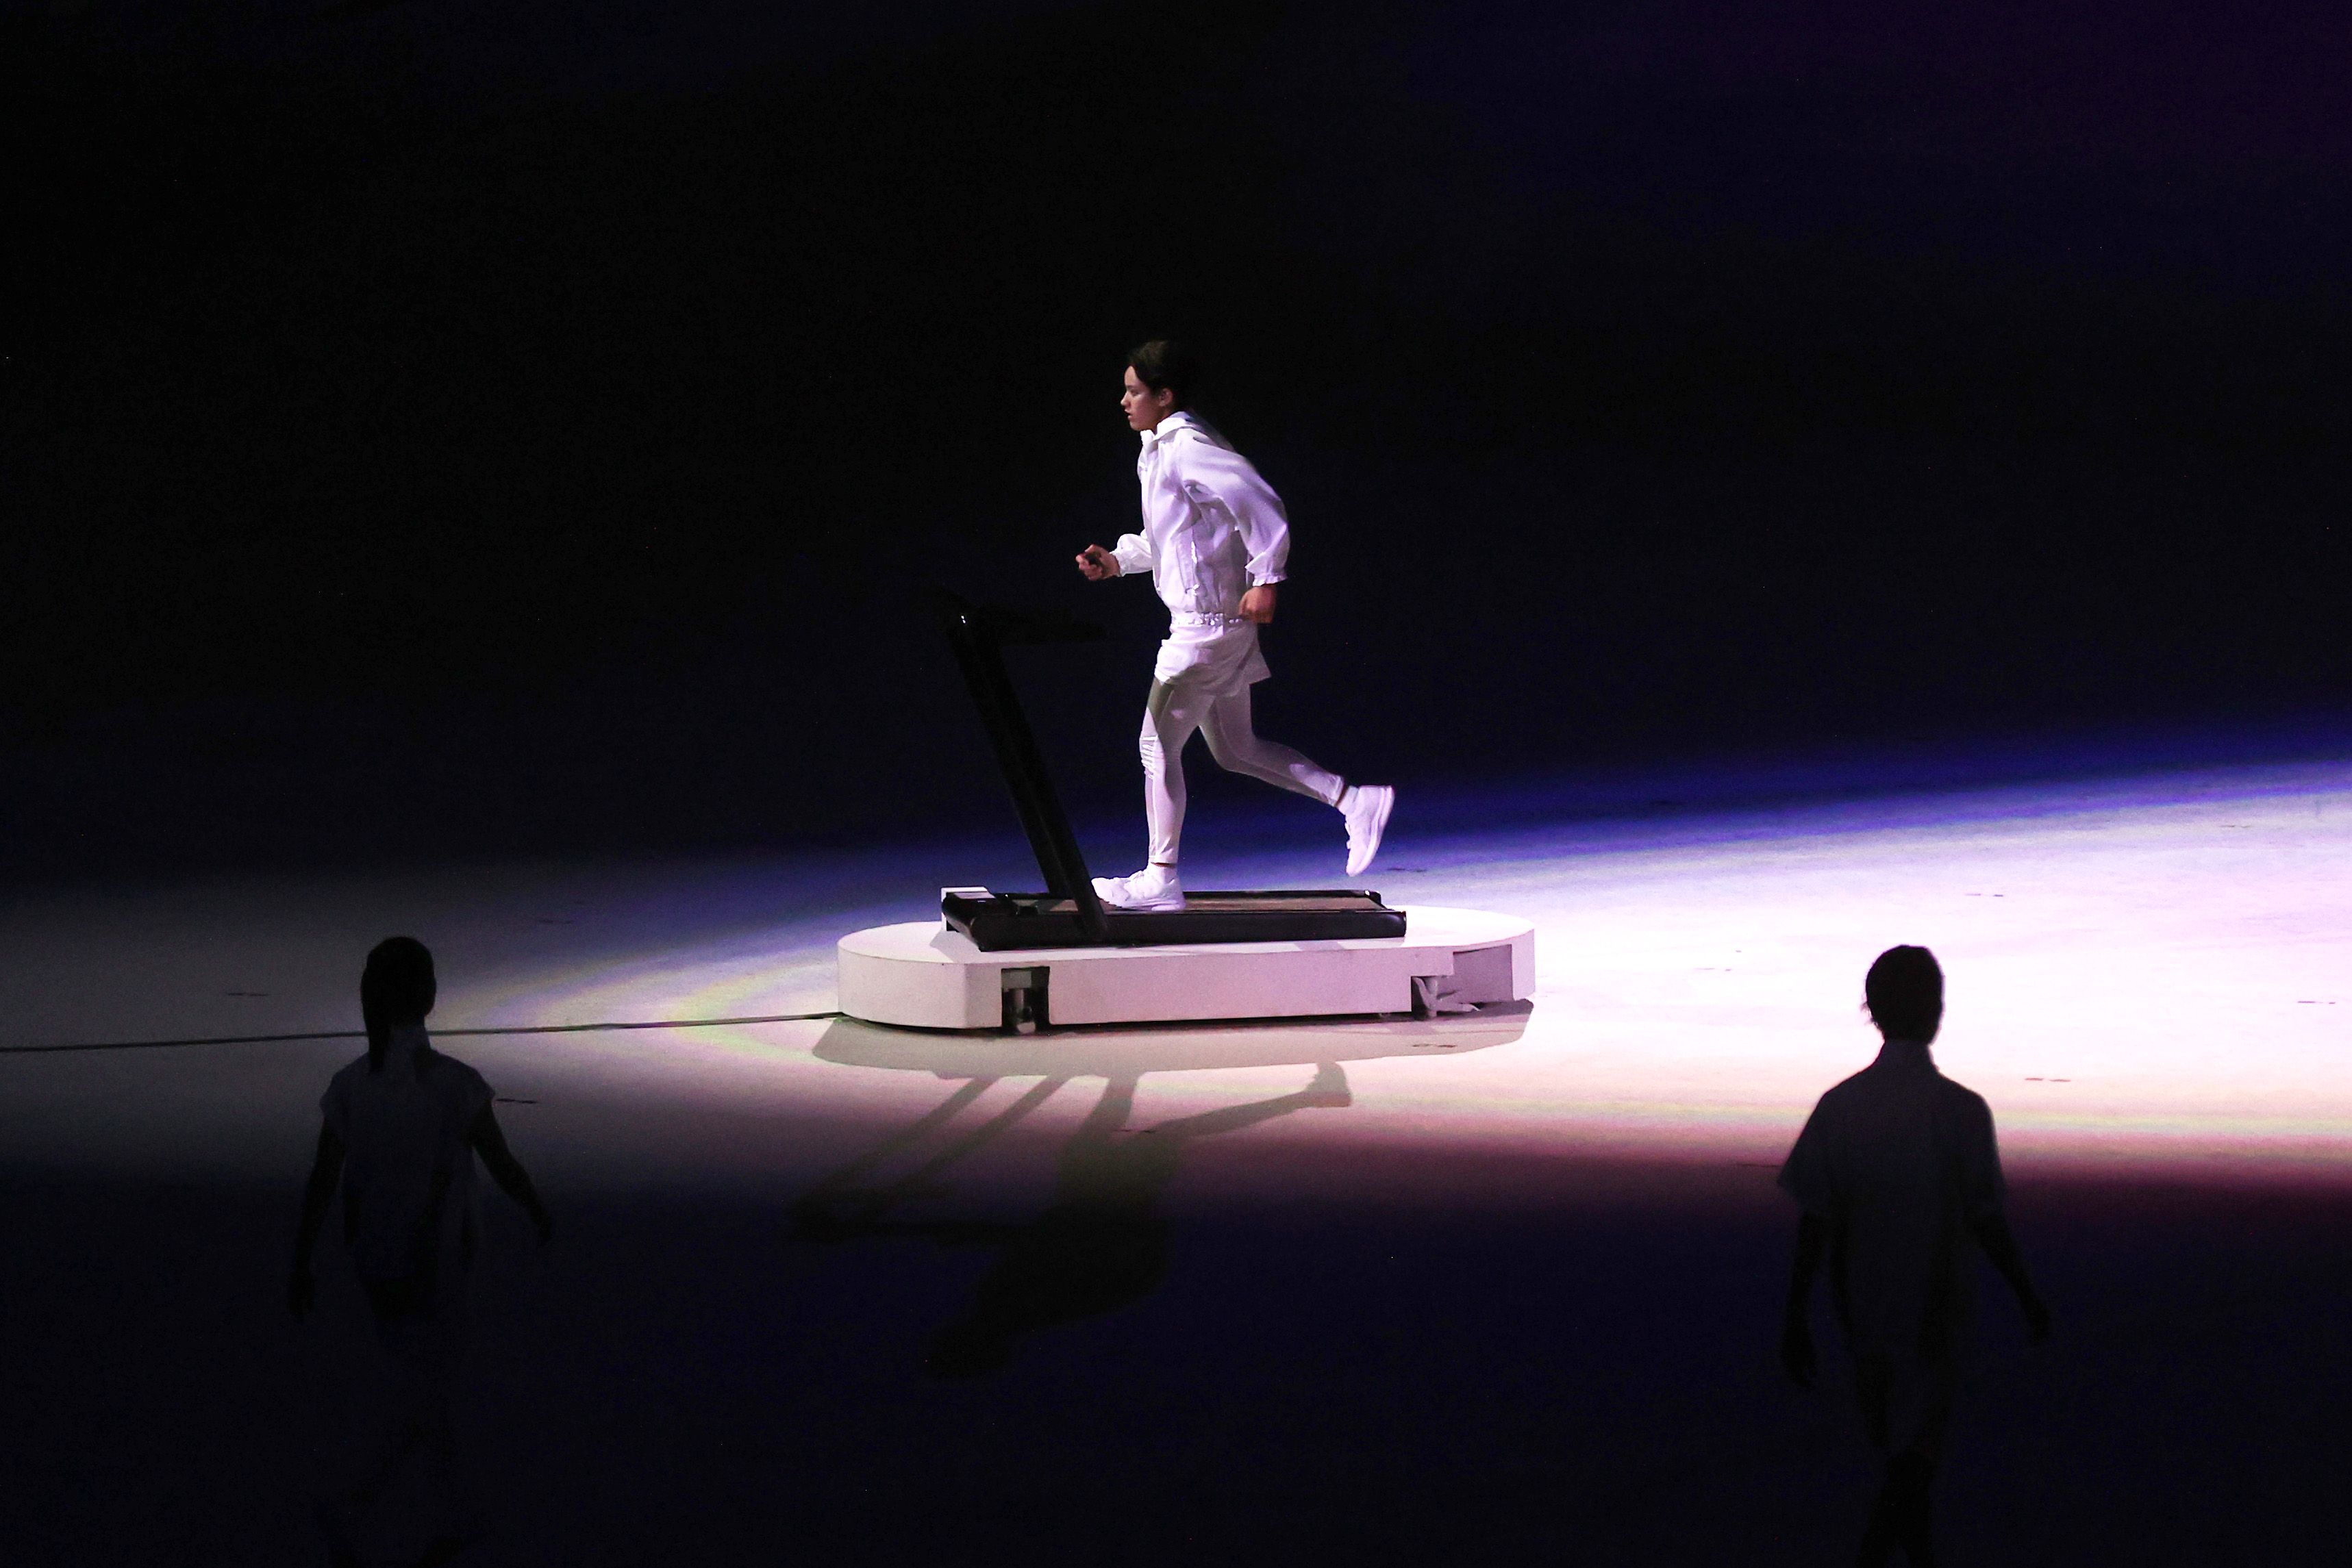 pICTURE OF Olympics Performer